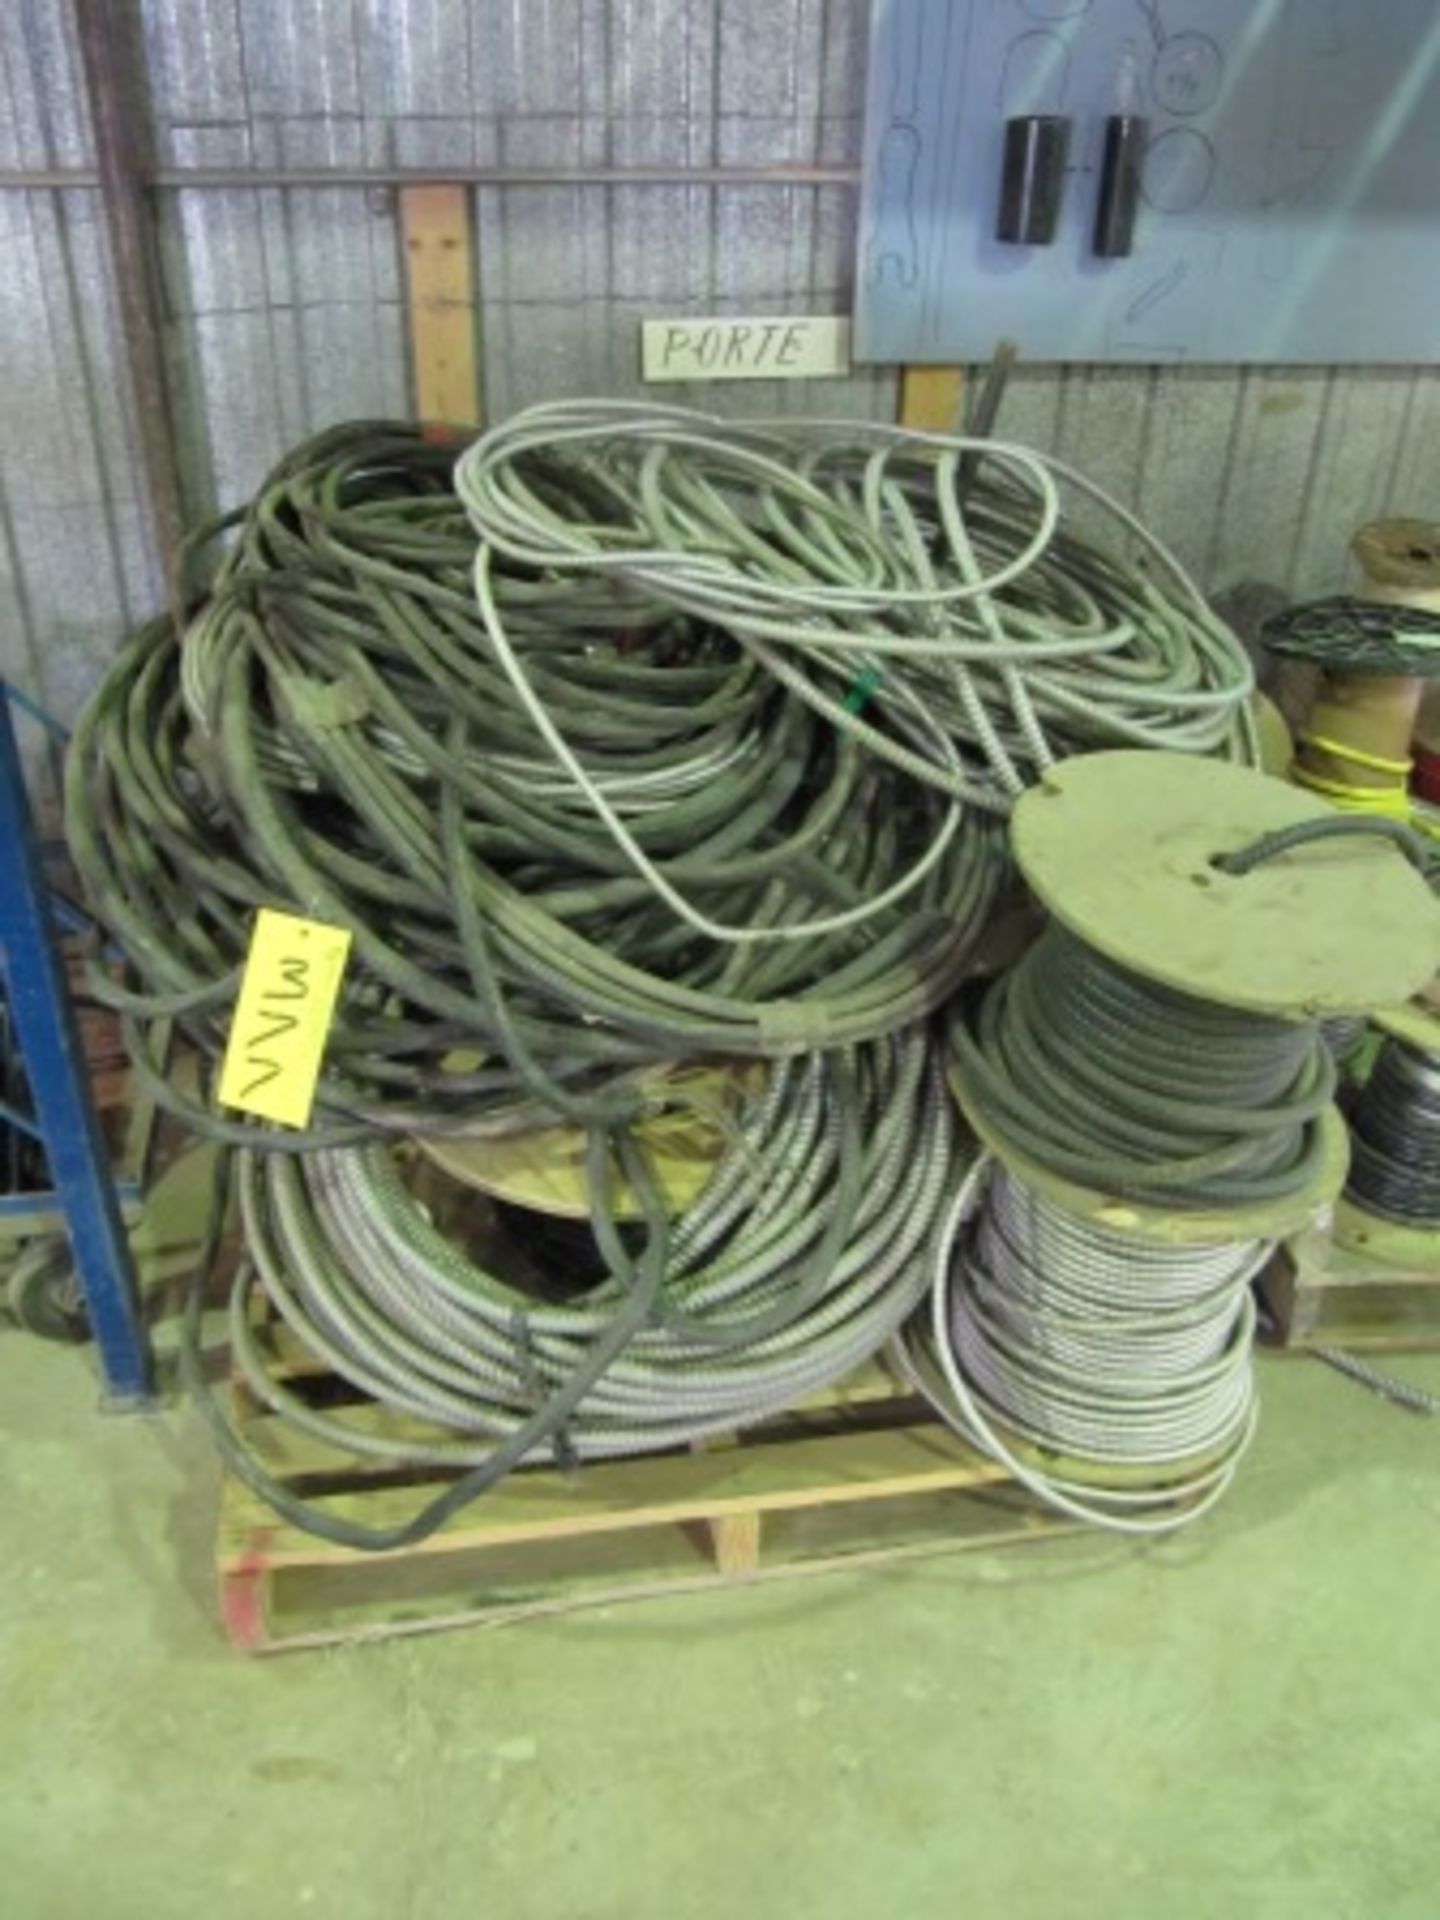 LOT ASST. ELECTRIAL WIRE, BOX CABLE, ETC. (1 SKID)